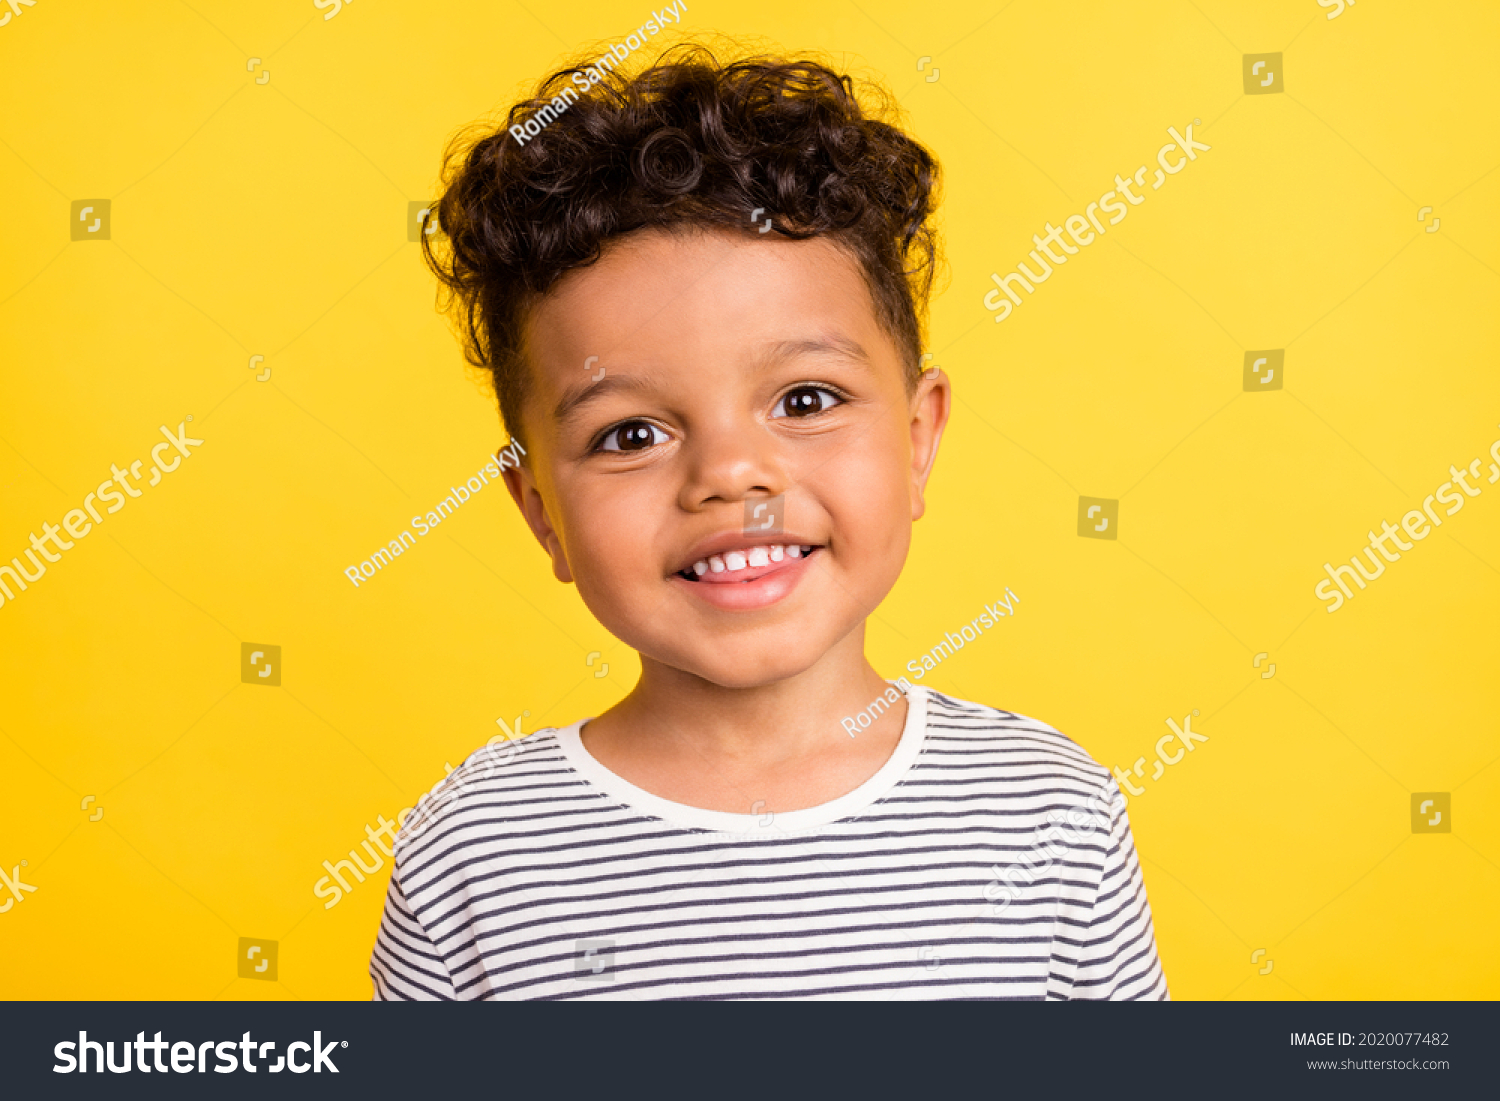 Photo portrait cheerful small boy smiling in striped shirt isolated bright yellow color background #2020077482